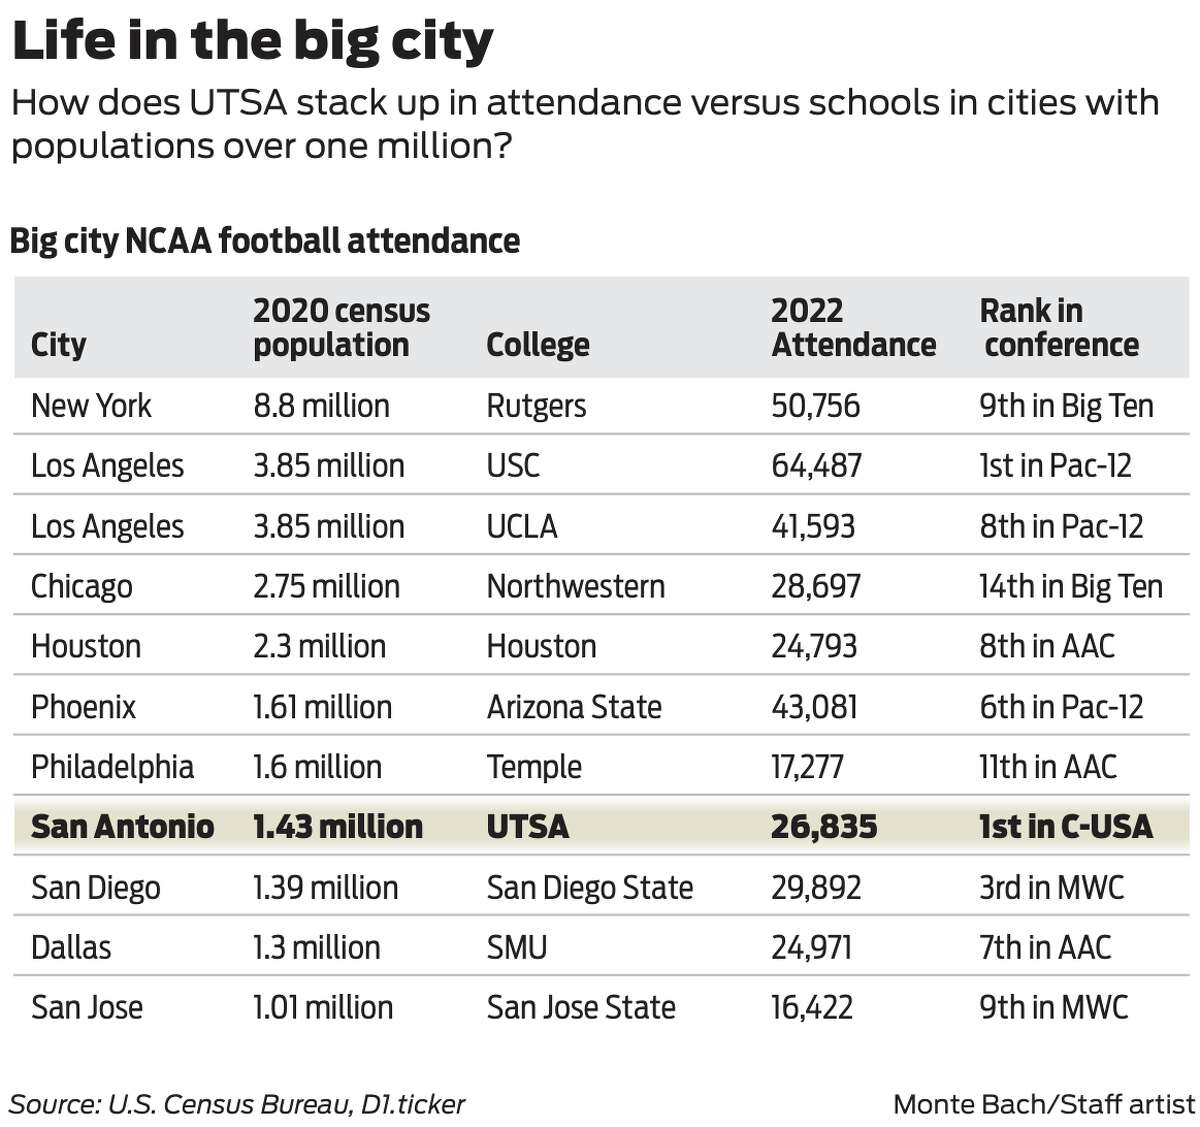 How does UTSA stack up in attendance versus schools in cities with populations over one million?